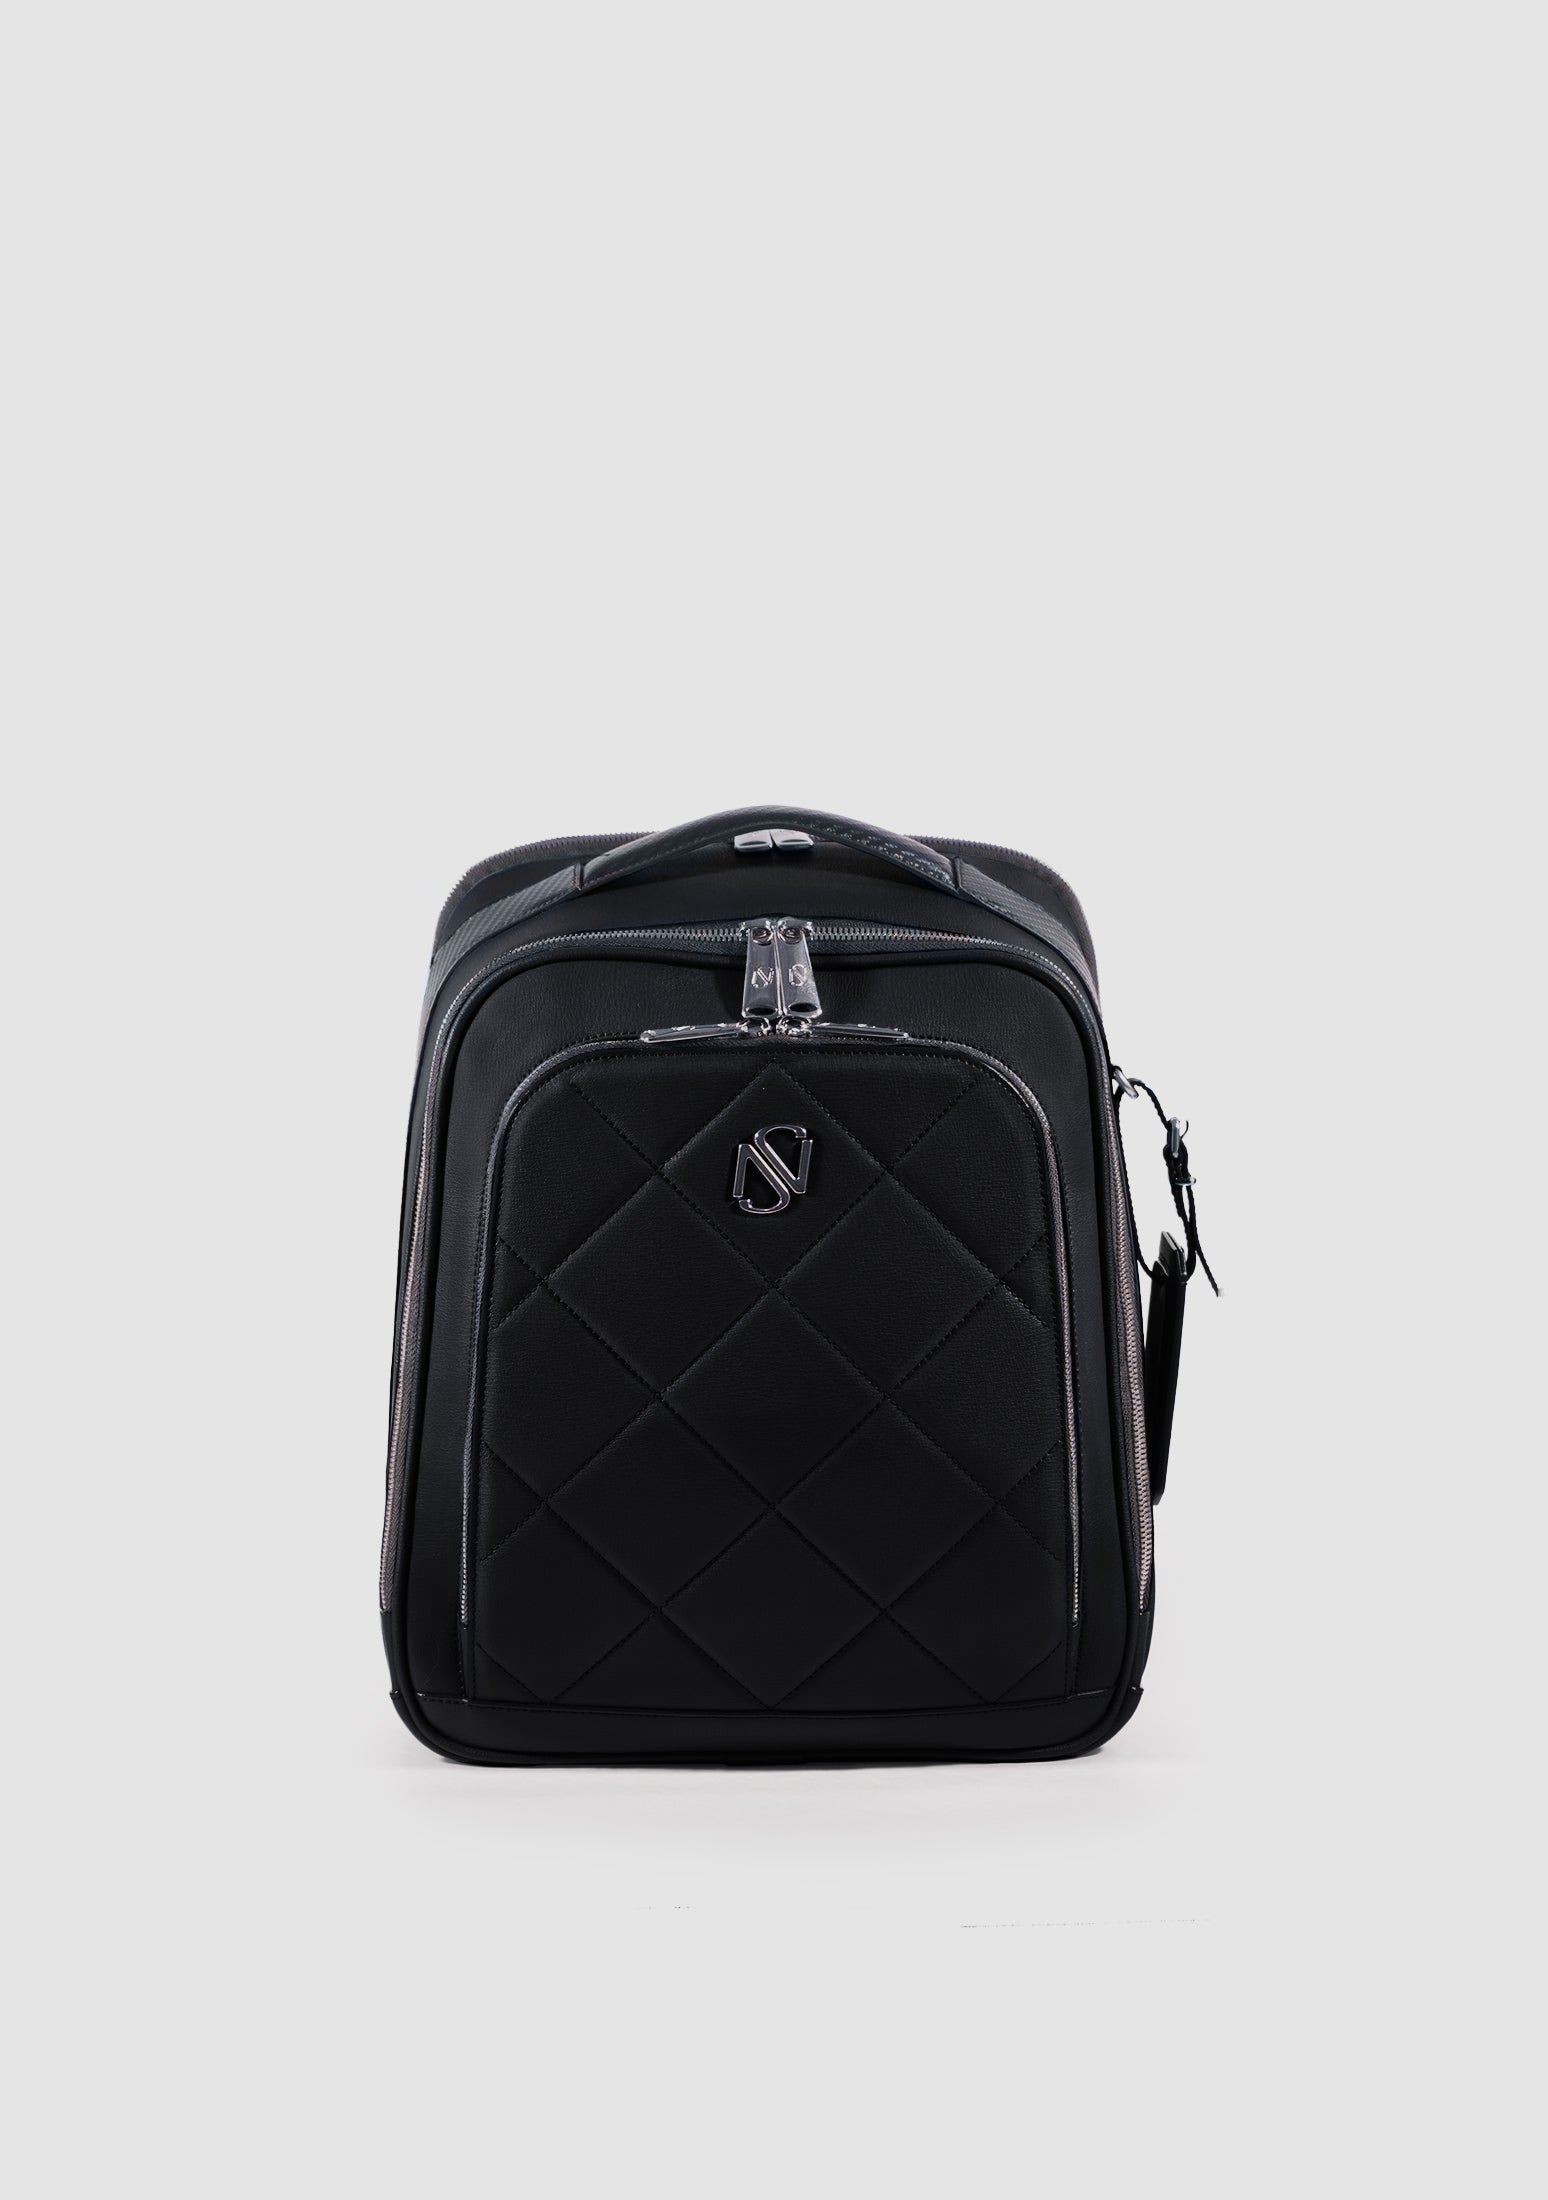 35 Dune Limited Black Calf Leather Backpack